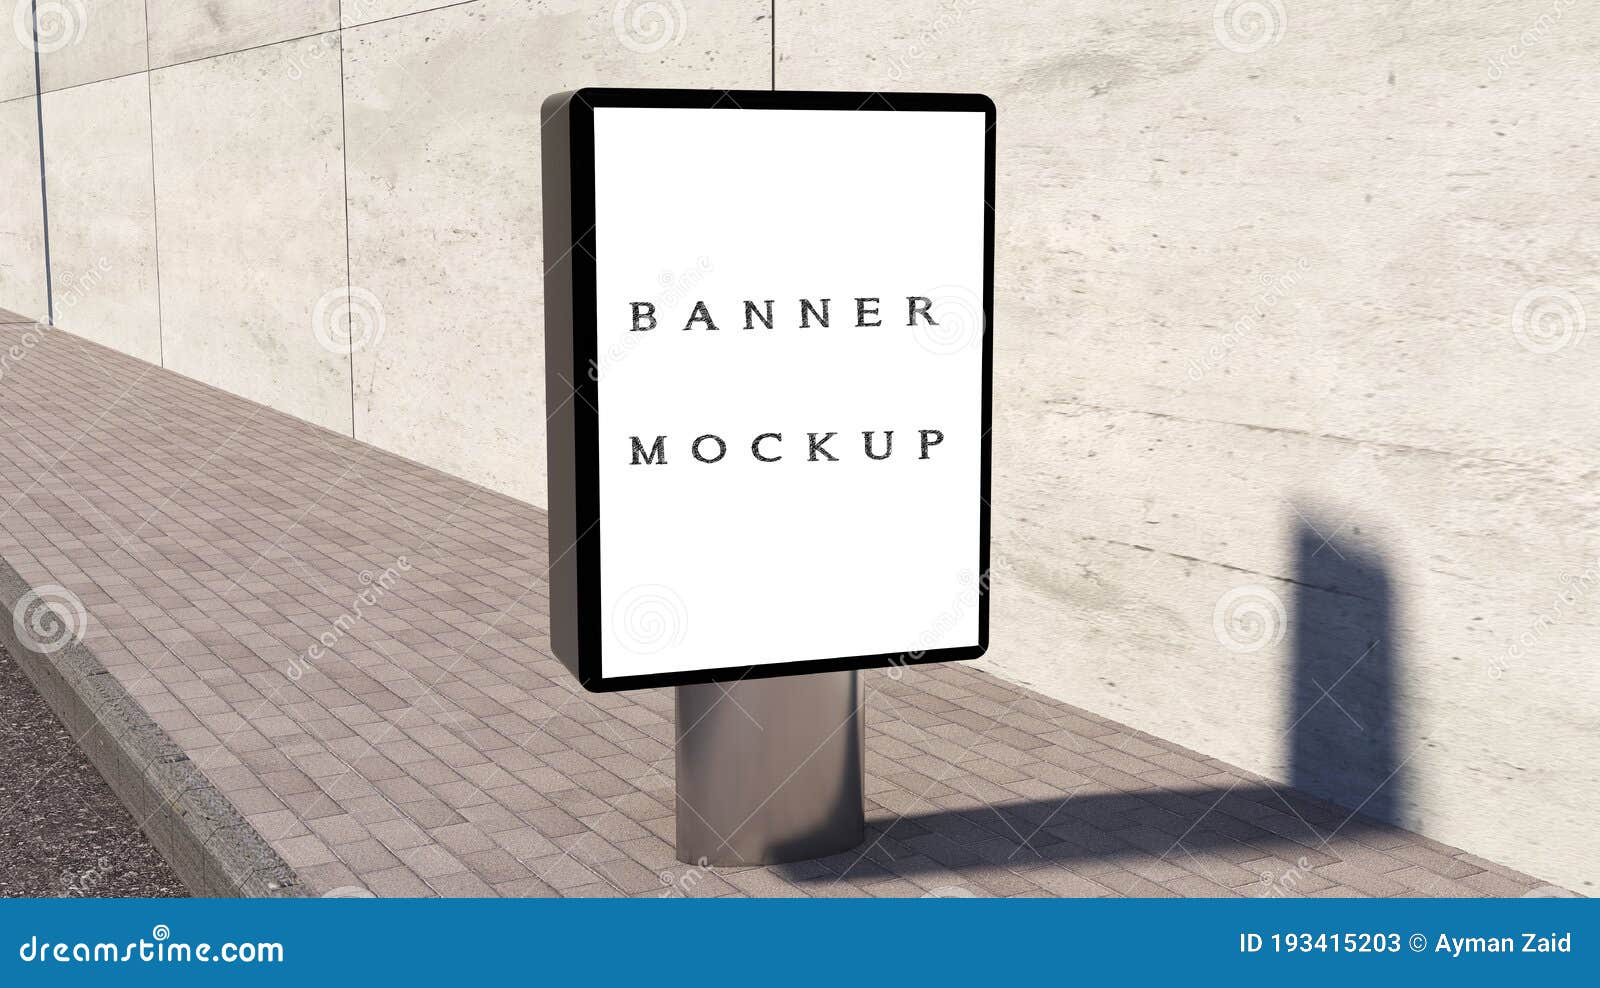 Blank Billboard Empty Advertisement Isolated On Street Background Empty Banner Mockup Template Light Box Stock Image Image Of Brick Architecture 193415203